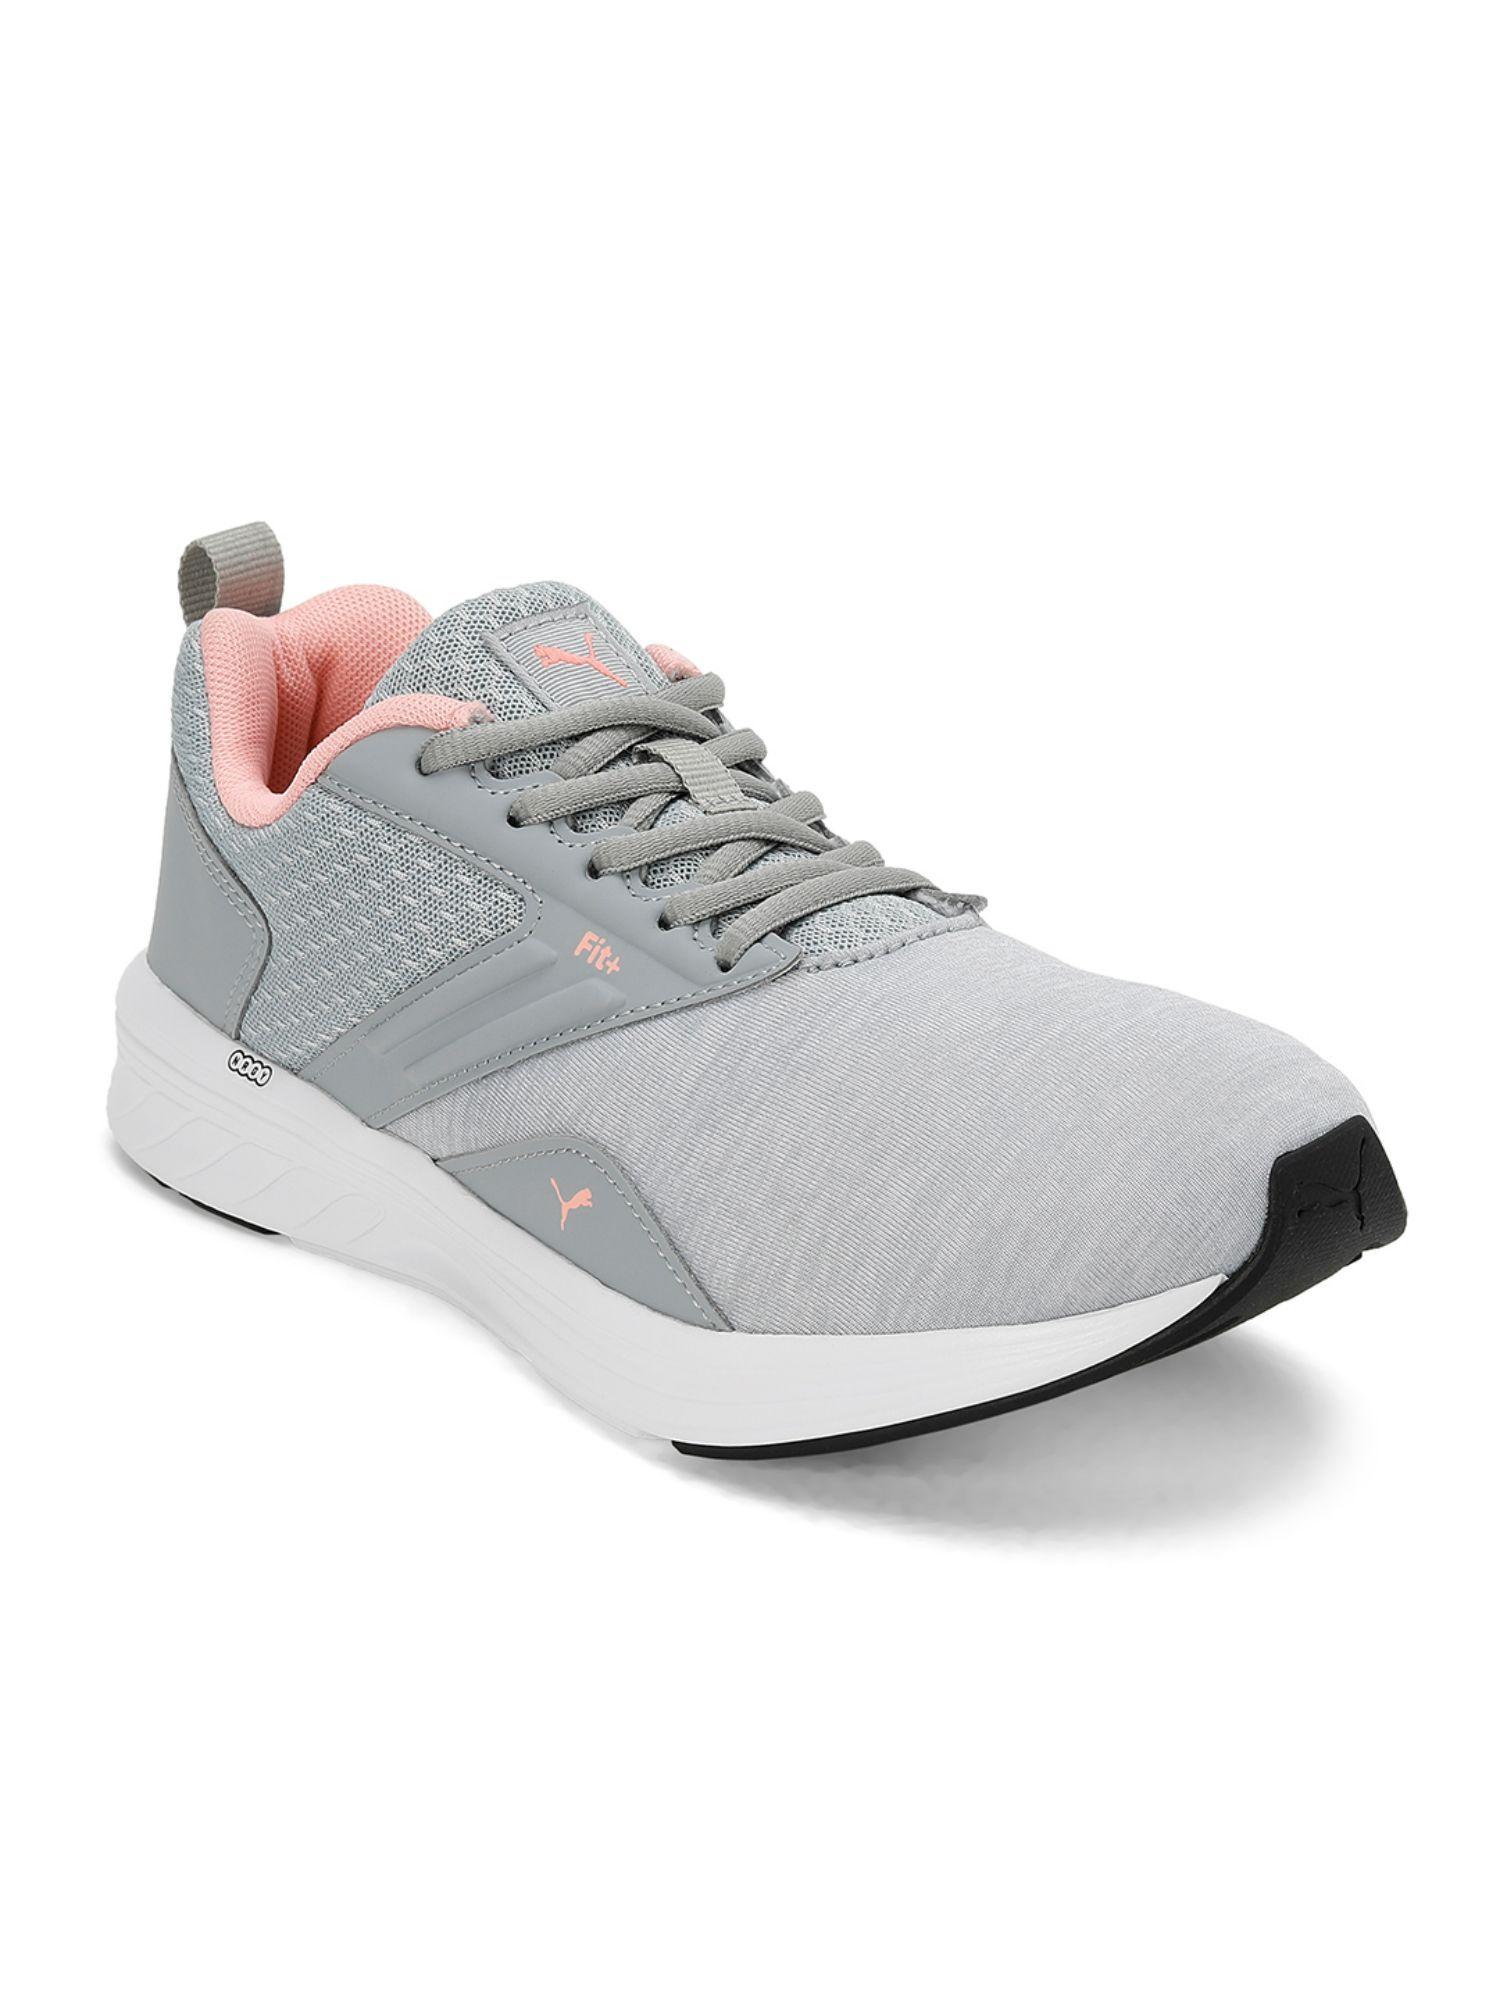 Nrgy Comet Unisex Grey Running Shoes